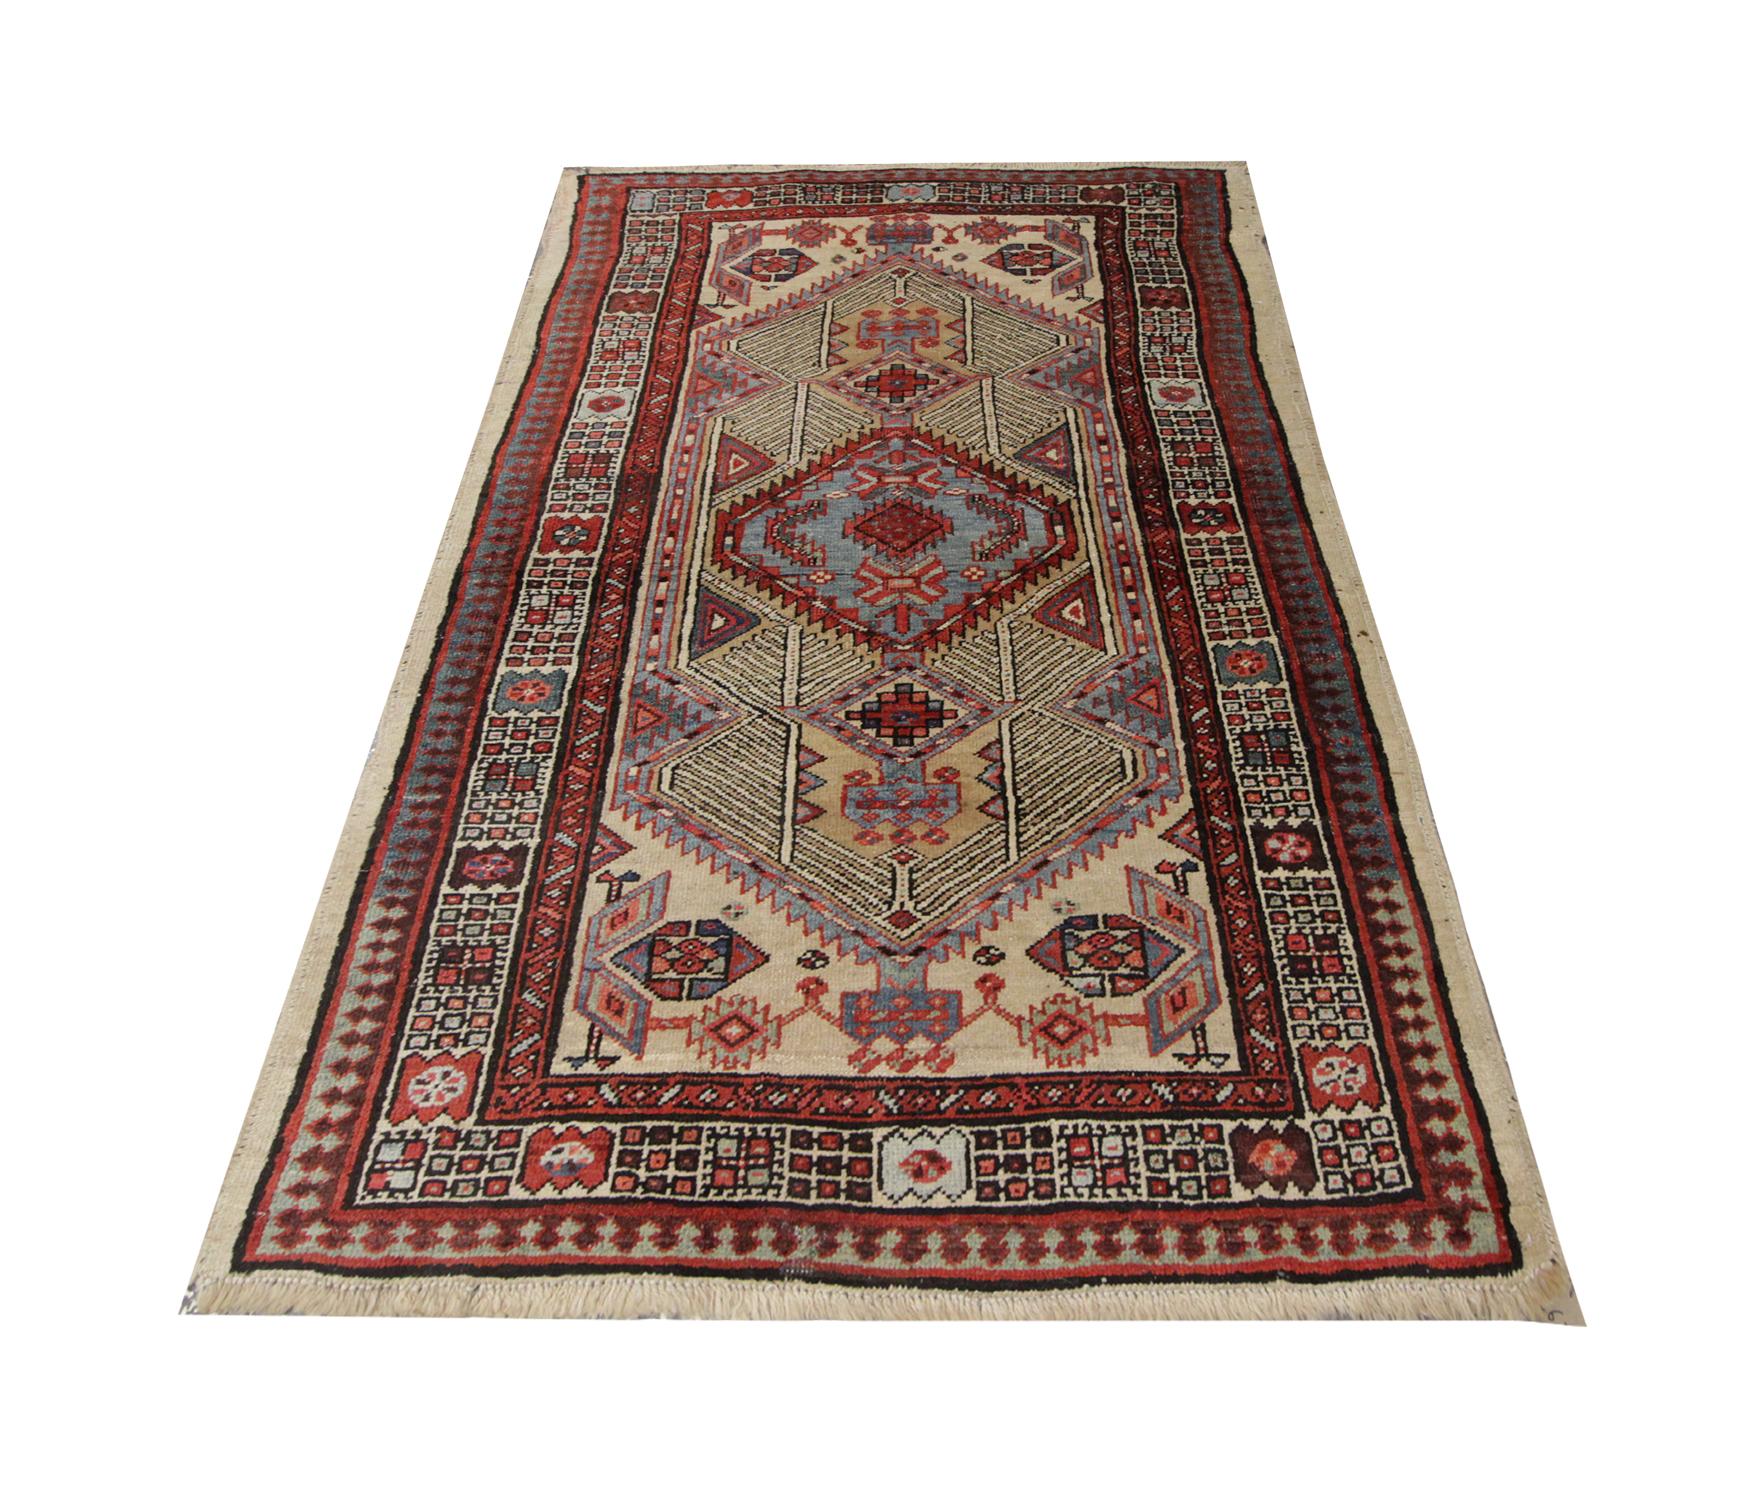 Handmade in the 1940s this highly detailed area rug features a tribal geometric design. The multi-layered border reveals a repeat pattern which encompasses the central design. In the central motif is a stylised pool woven in blue which contrasts